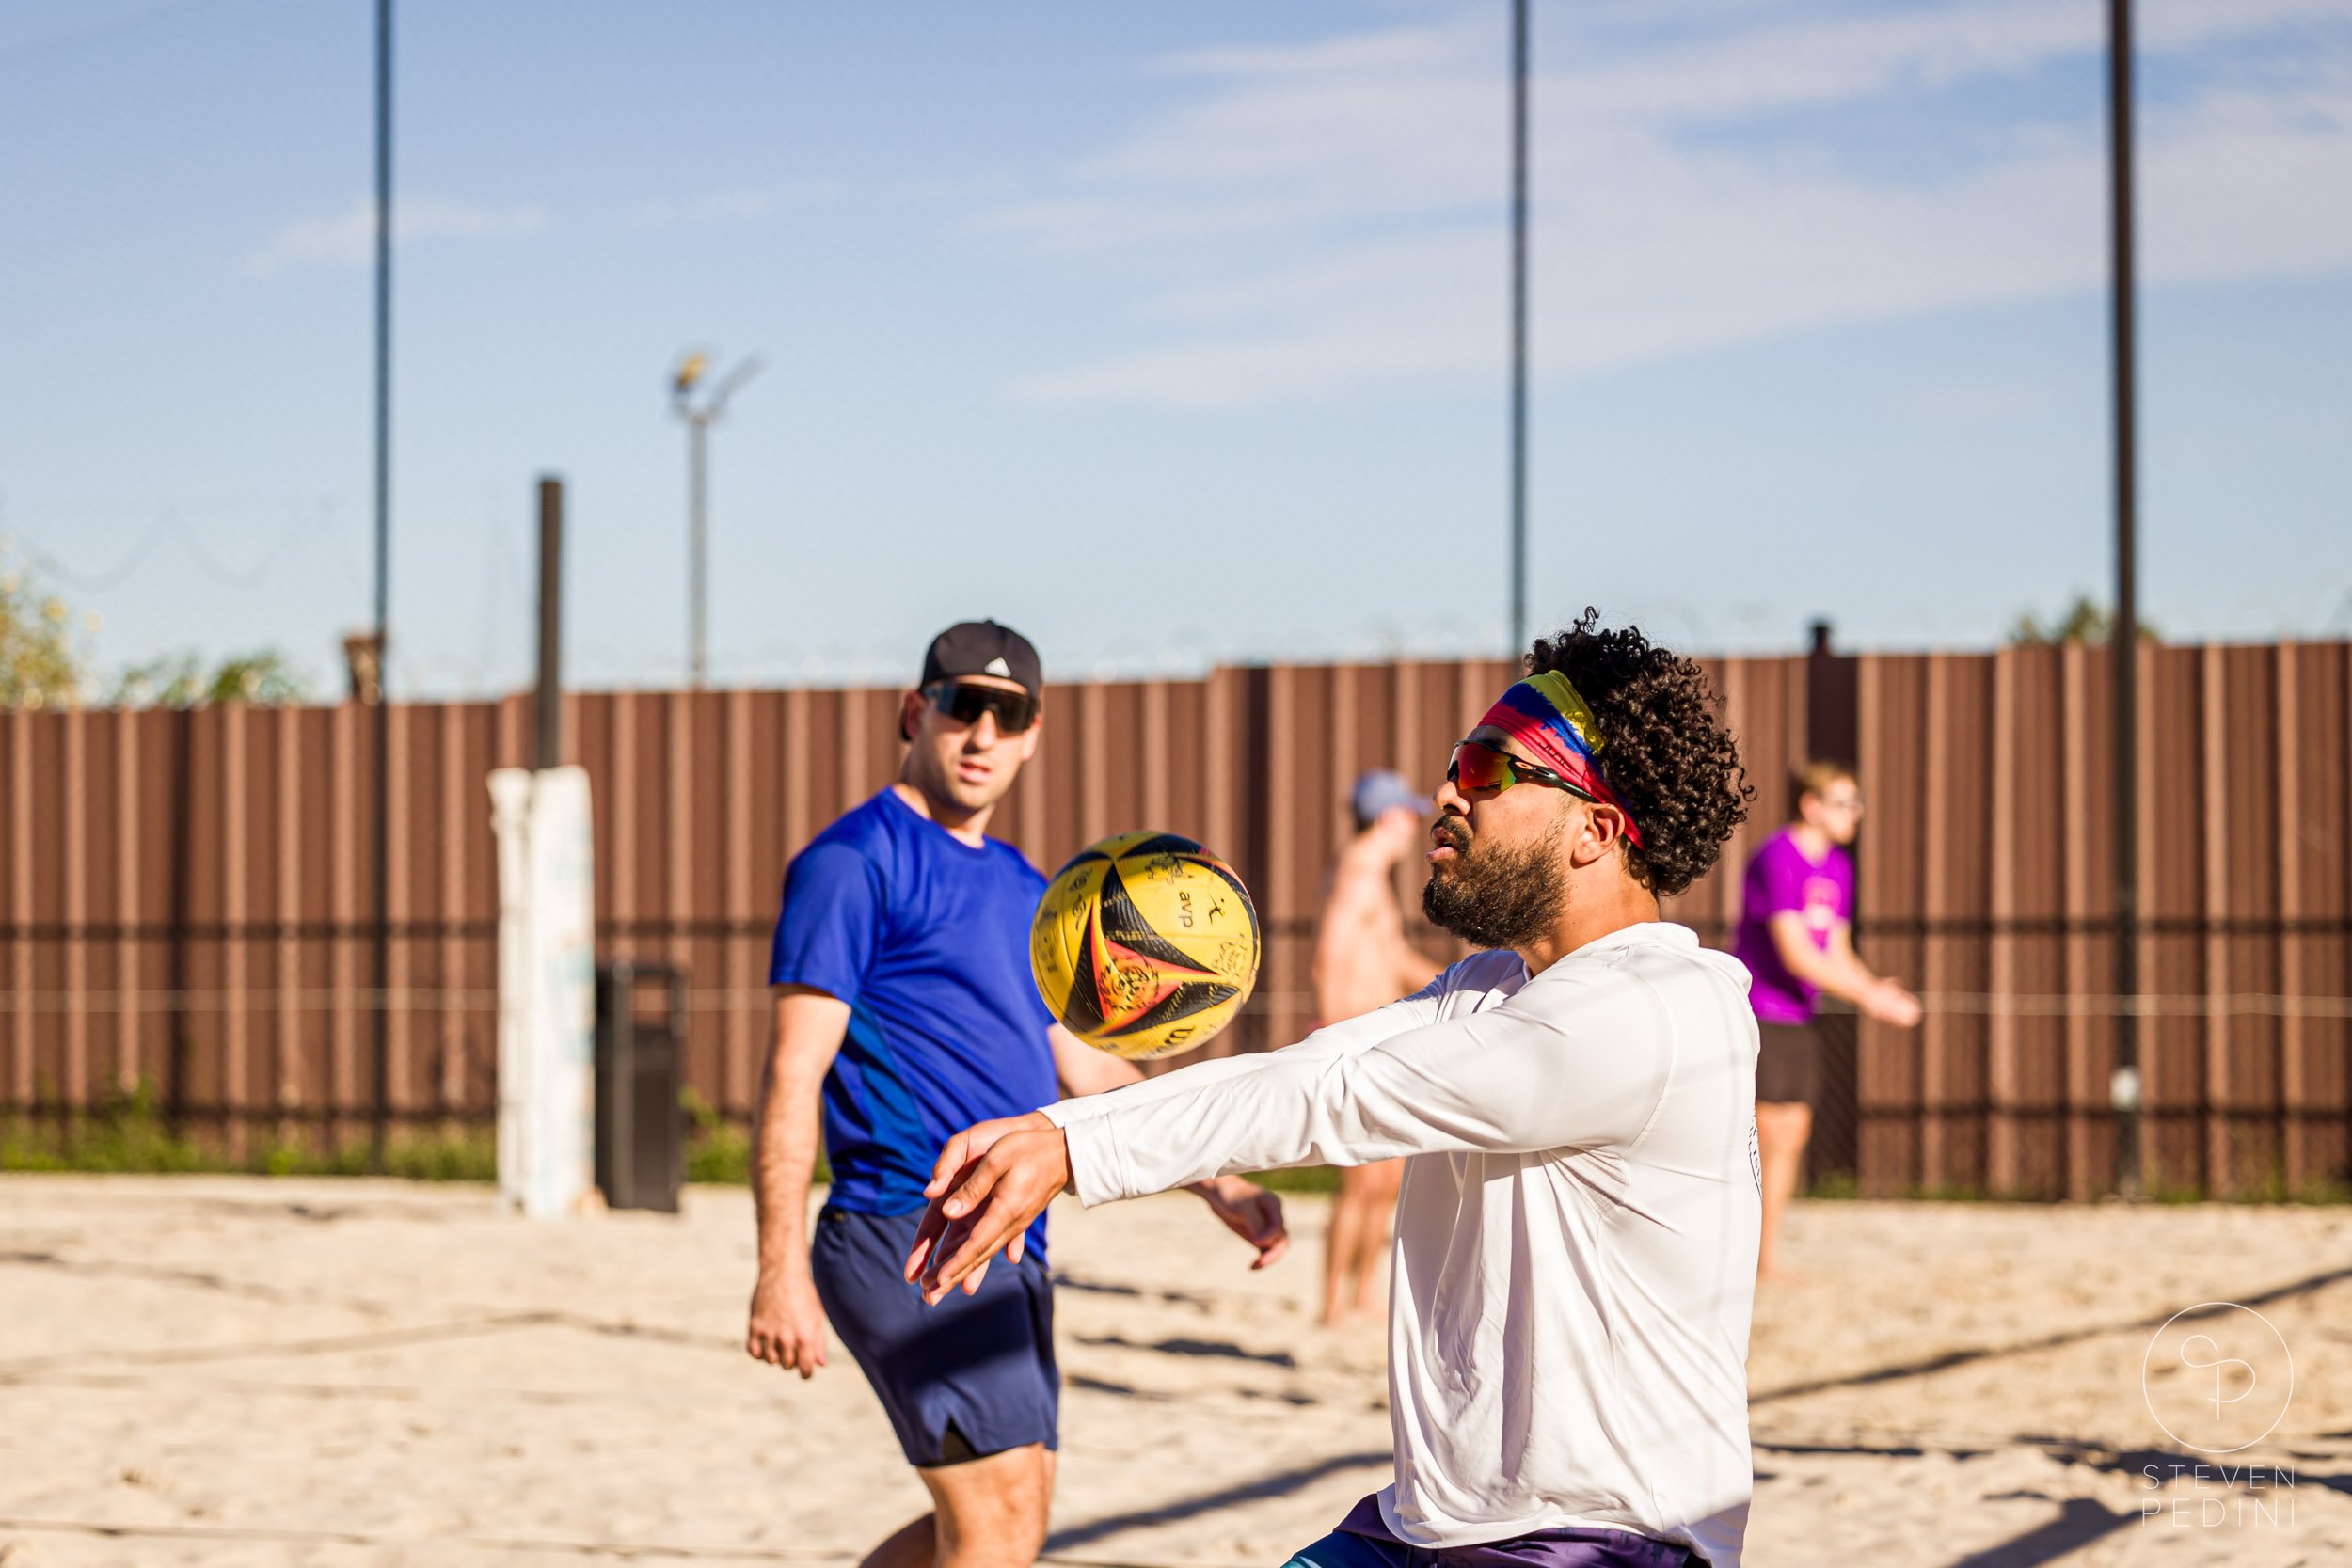 Steven Pedini Photography - Bumpy Pickle - Sand Volleyball - Houston TX - World Cup of Volleyball - 00011.jpg